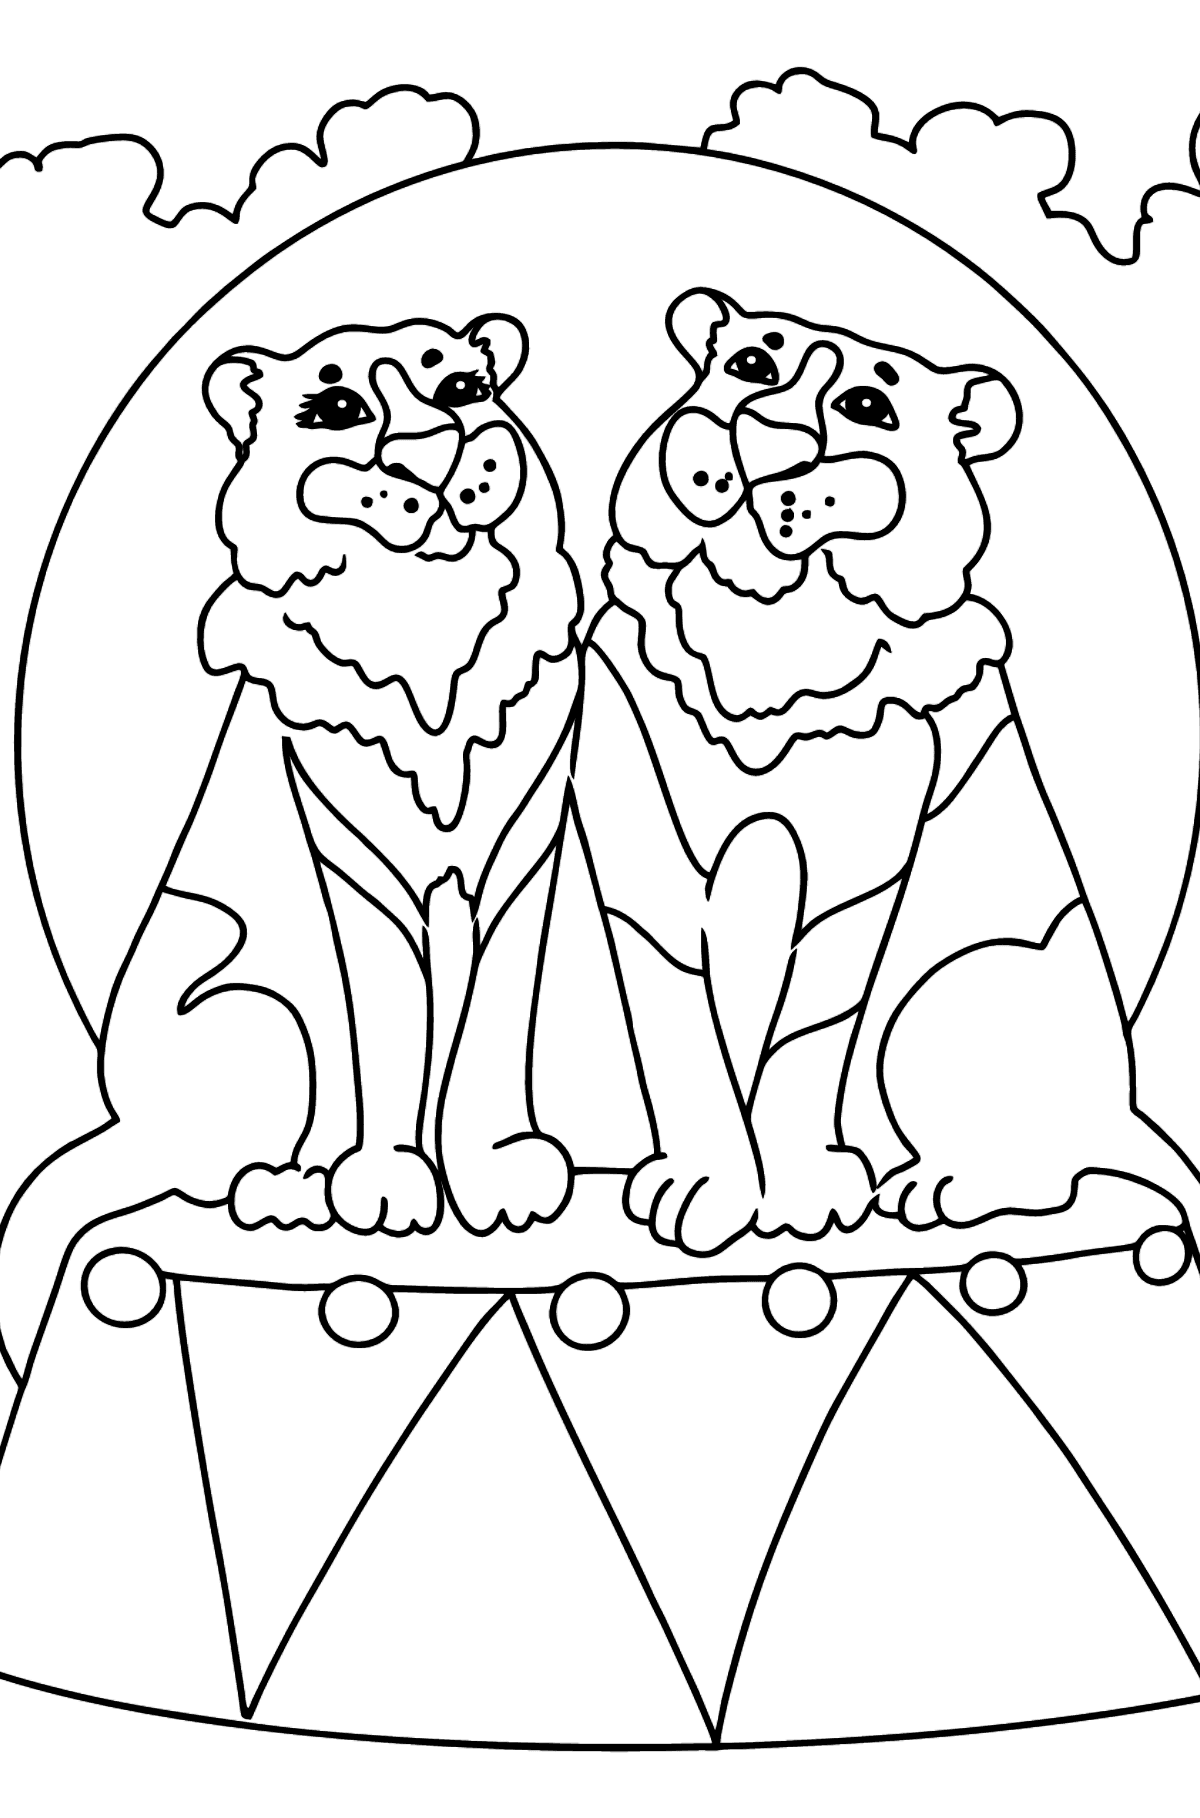 Coloring Page - A Tiger in a Circus Ring - Coloring Pages for Kids